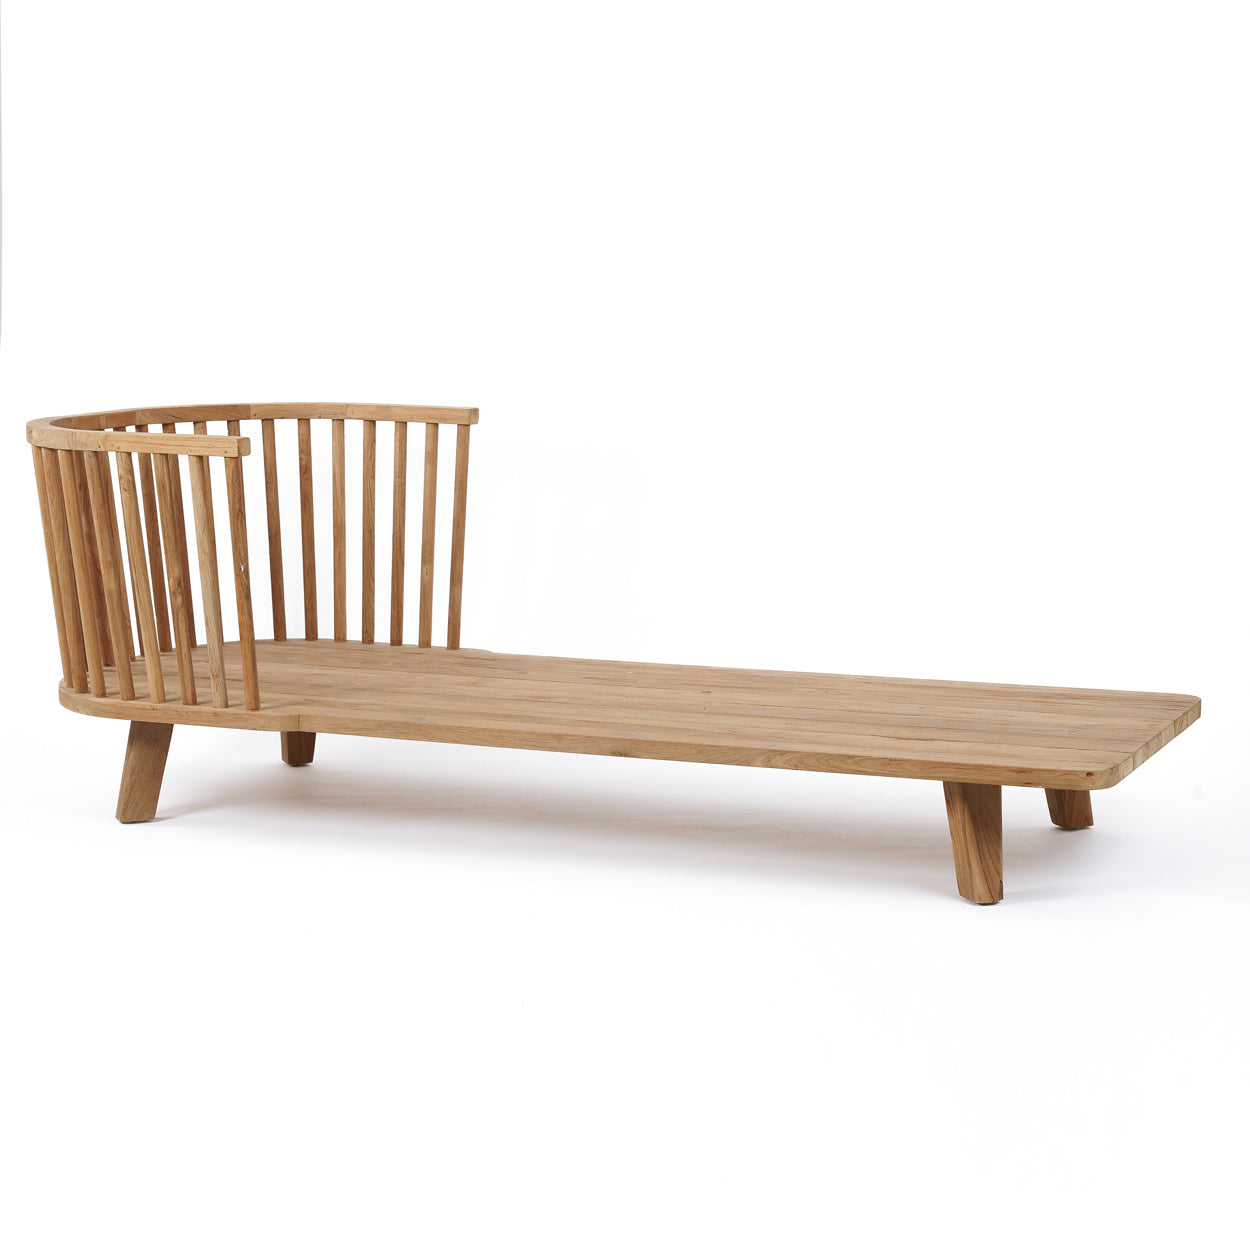 THE MALAWI Daybed Natural Frame